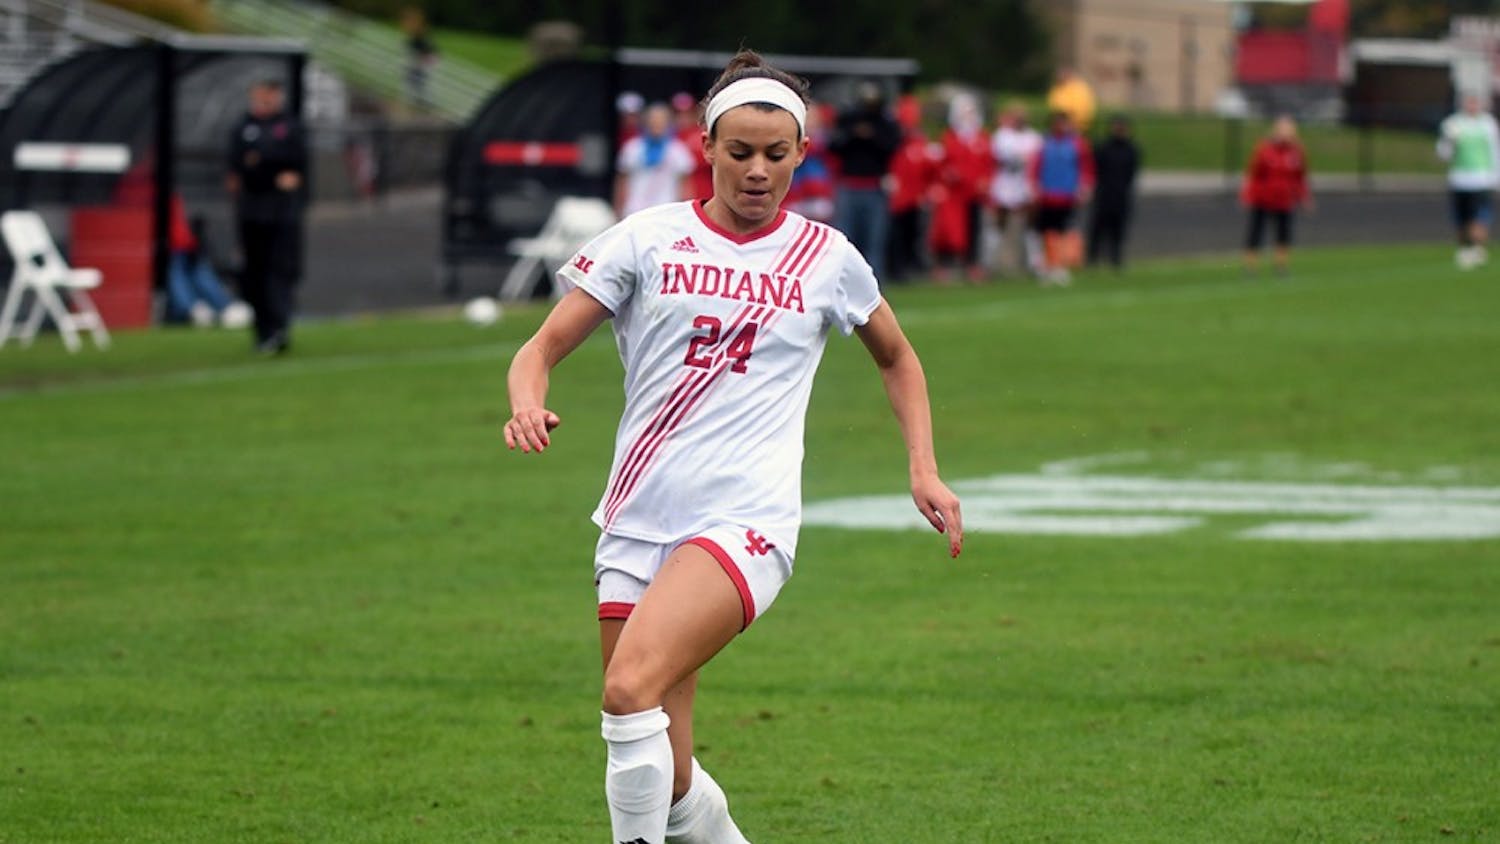 Sophomore forward Sydney Kilgore dribbles the ball against Nebraska Sunday afternoon at Bill Armstrong Stadium. Kilgore assisted on Mykayla Brown's second half goal in IU's 1-1 tie with Nebraska.